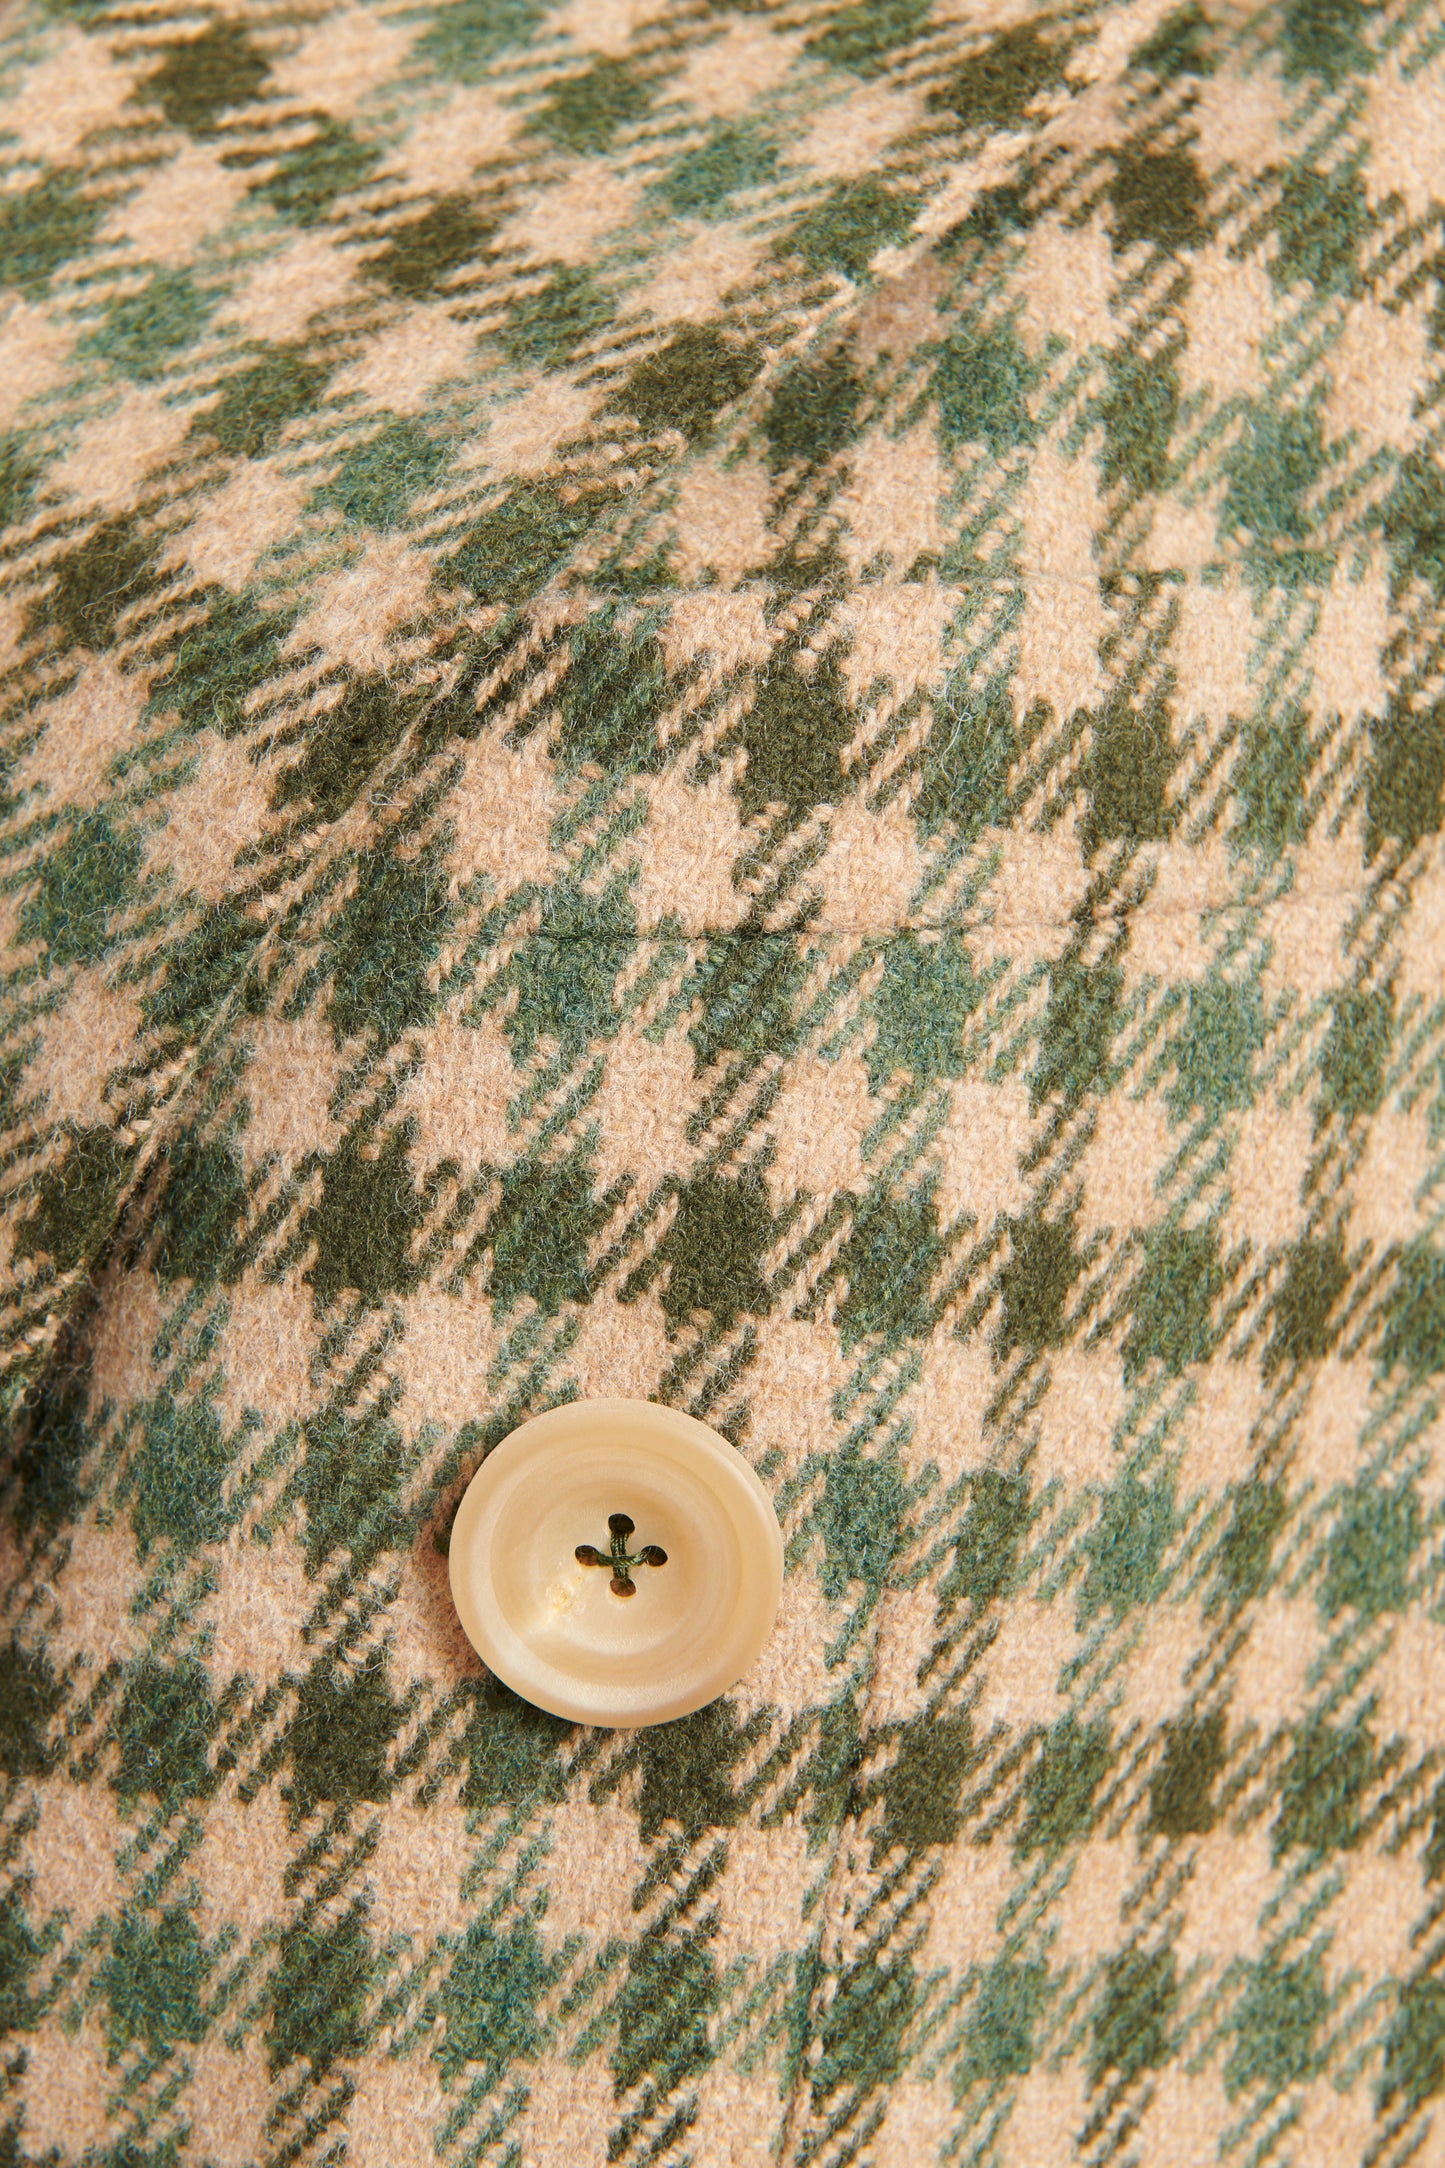 Beige Merino Wool Double Breasted Check Cindy Coat